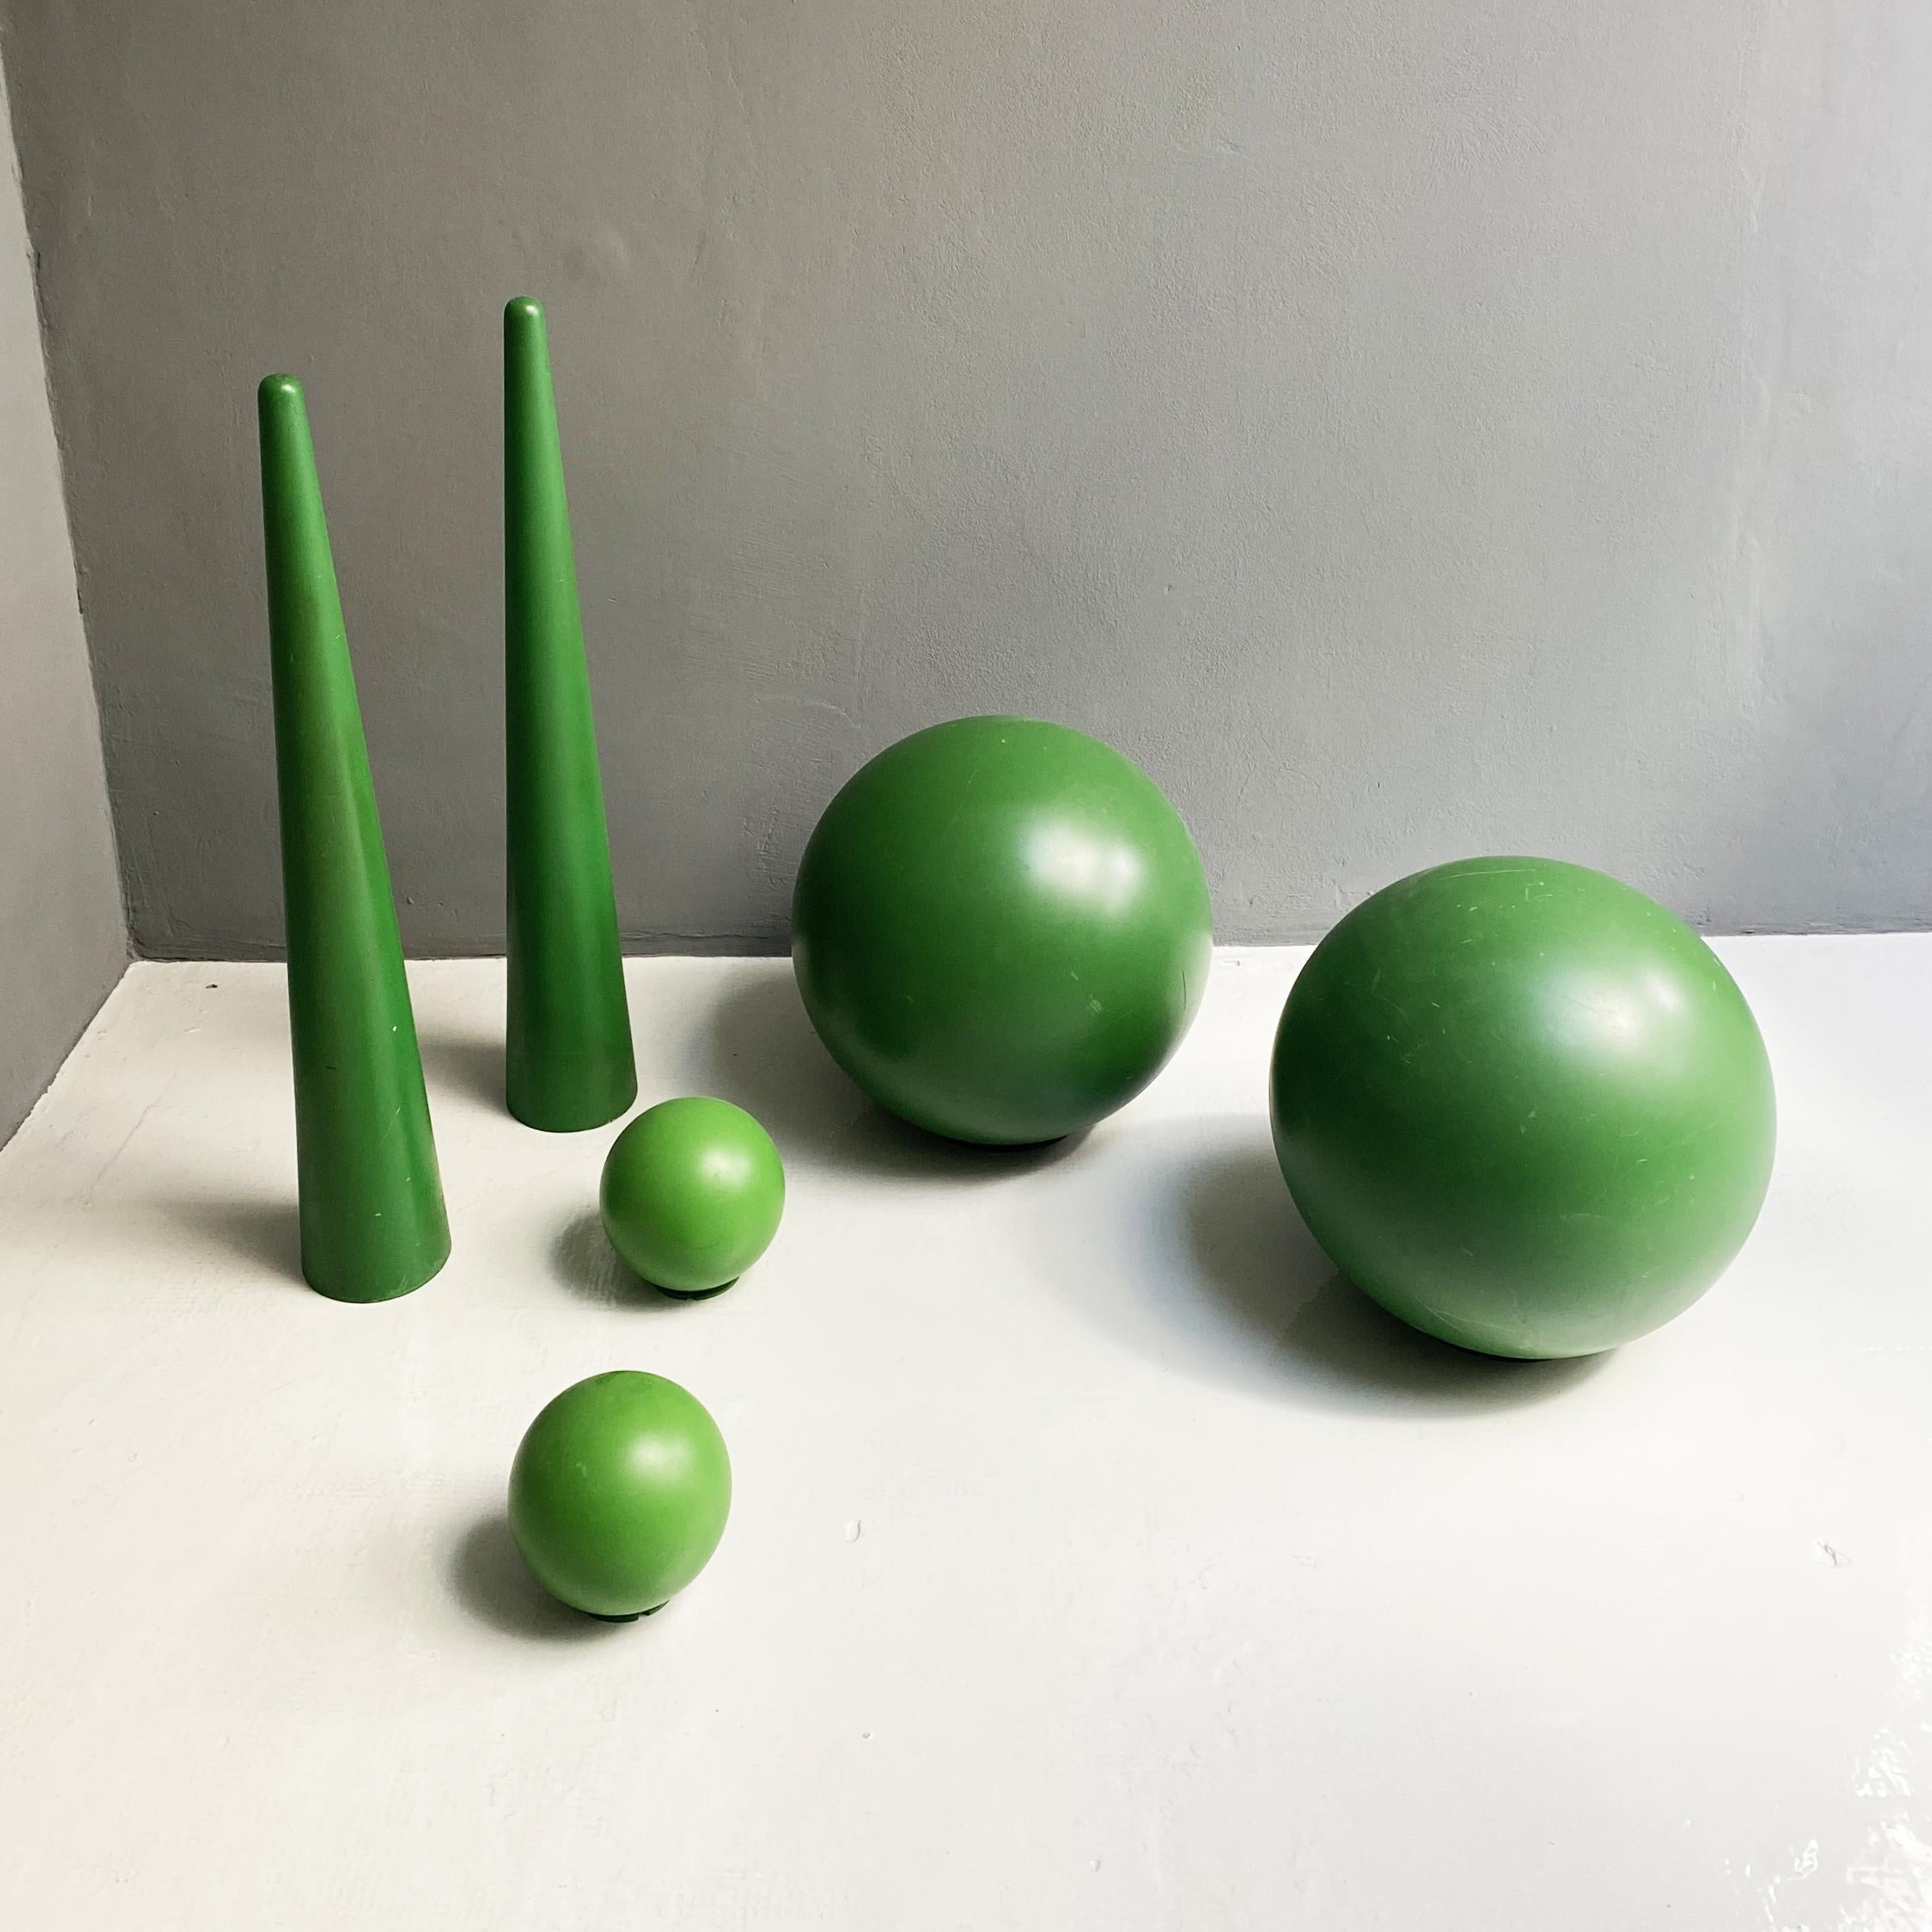 Italian Modern Green Plastic Props for Scenography, 1990s For Sale 3